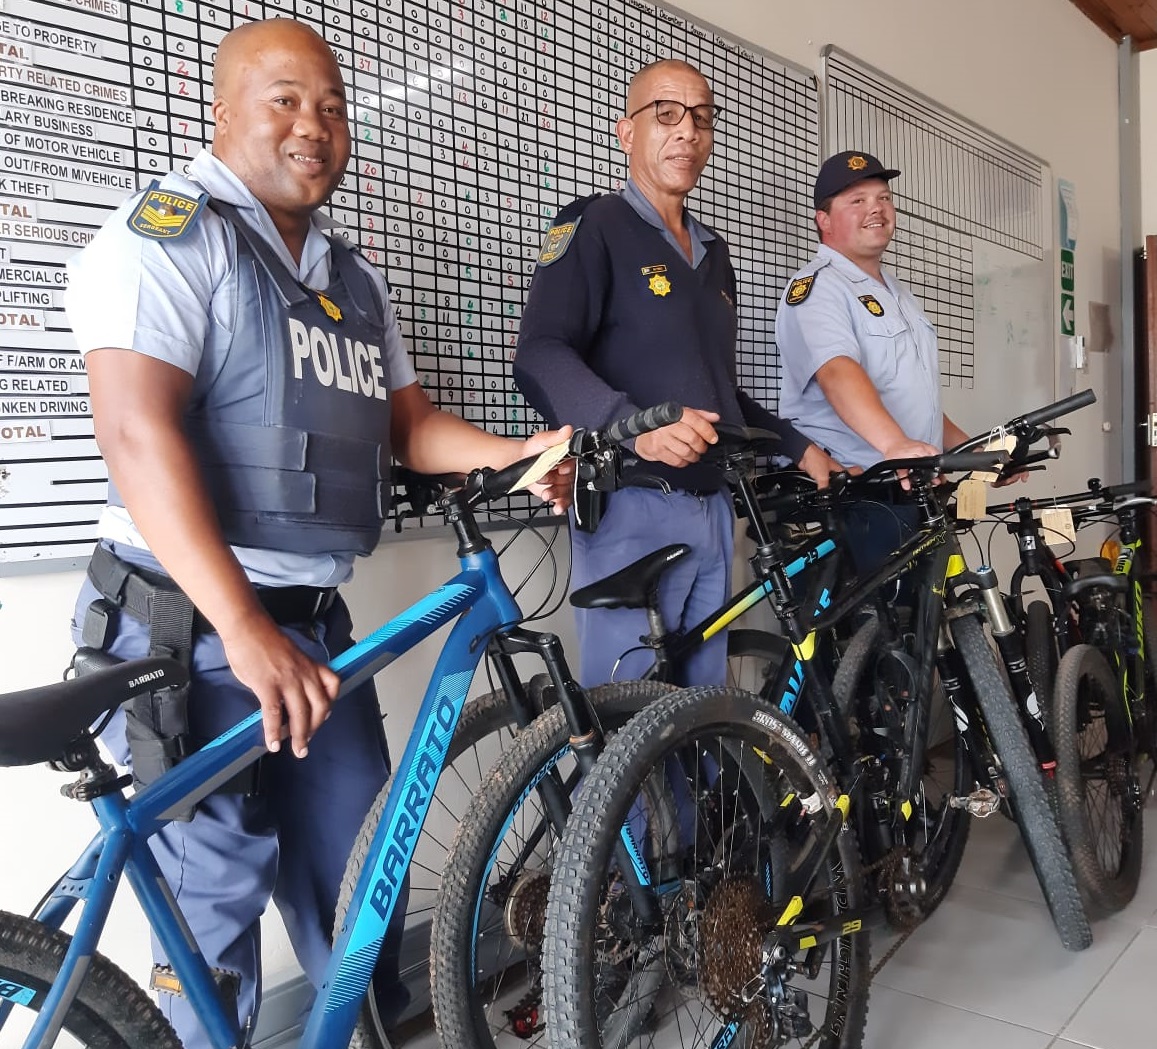 Six stolen bicycles worth over R87 000 recovered in Still Bay